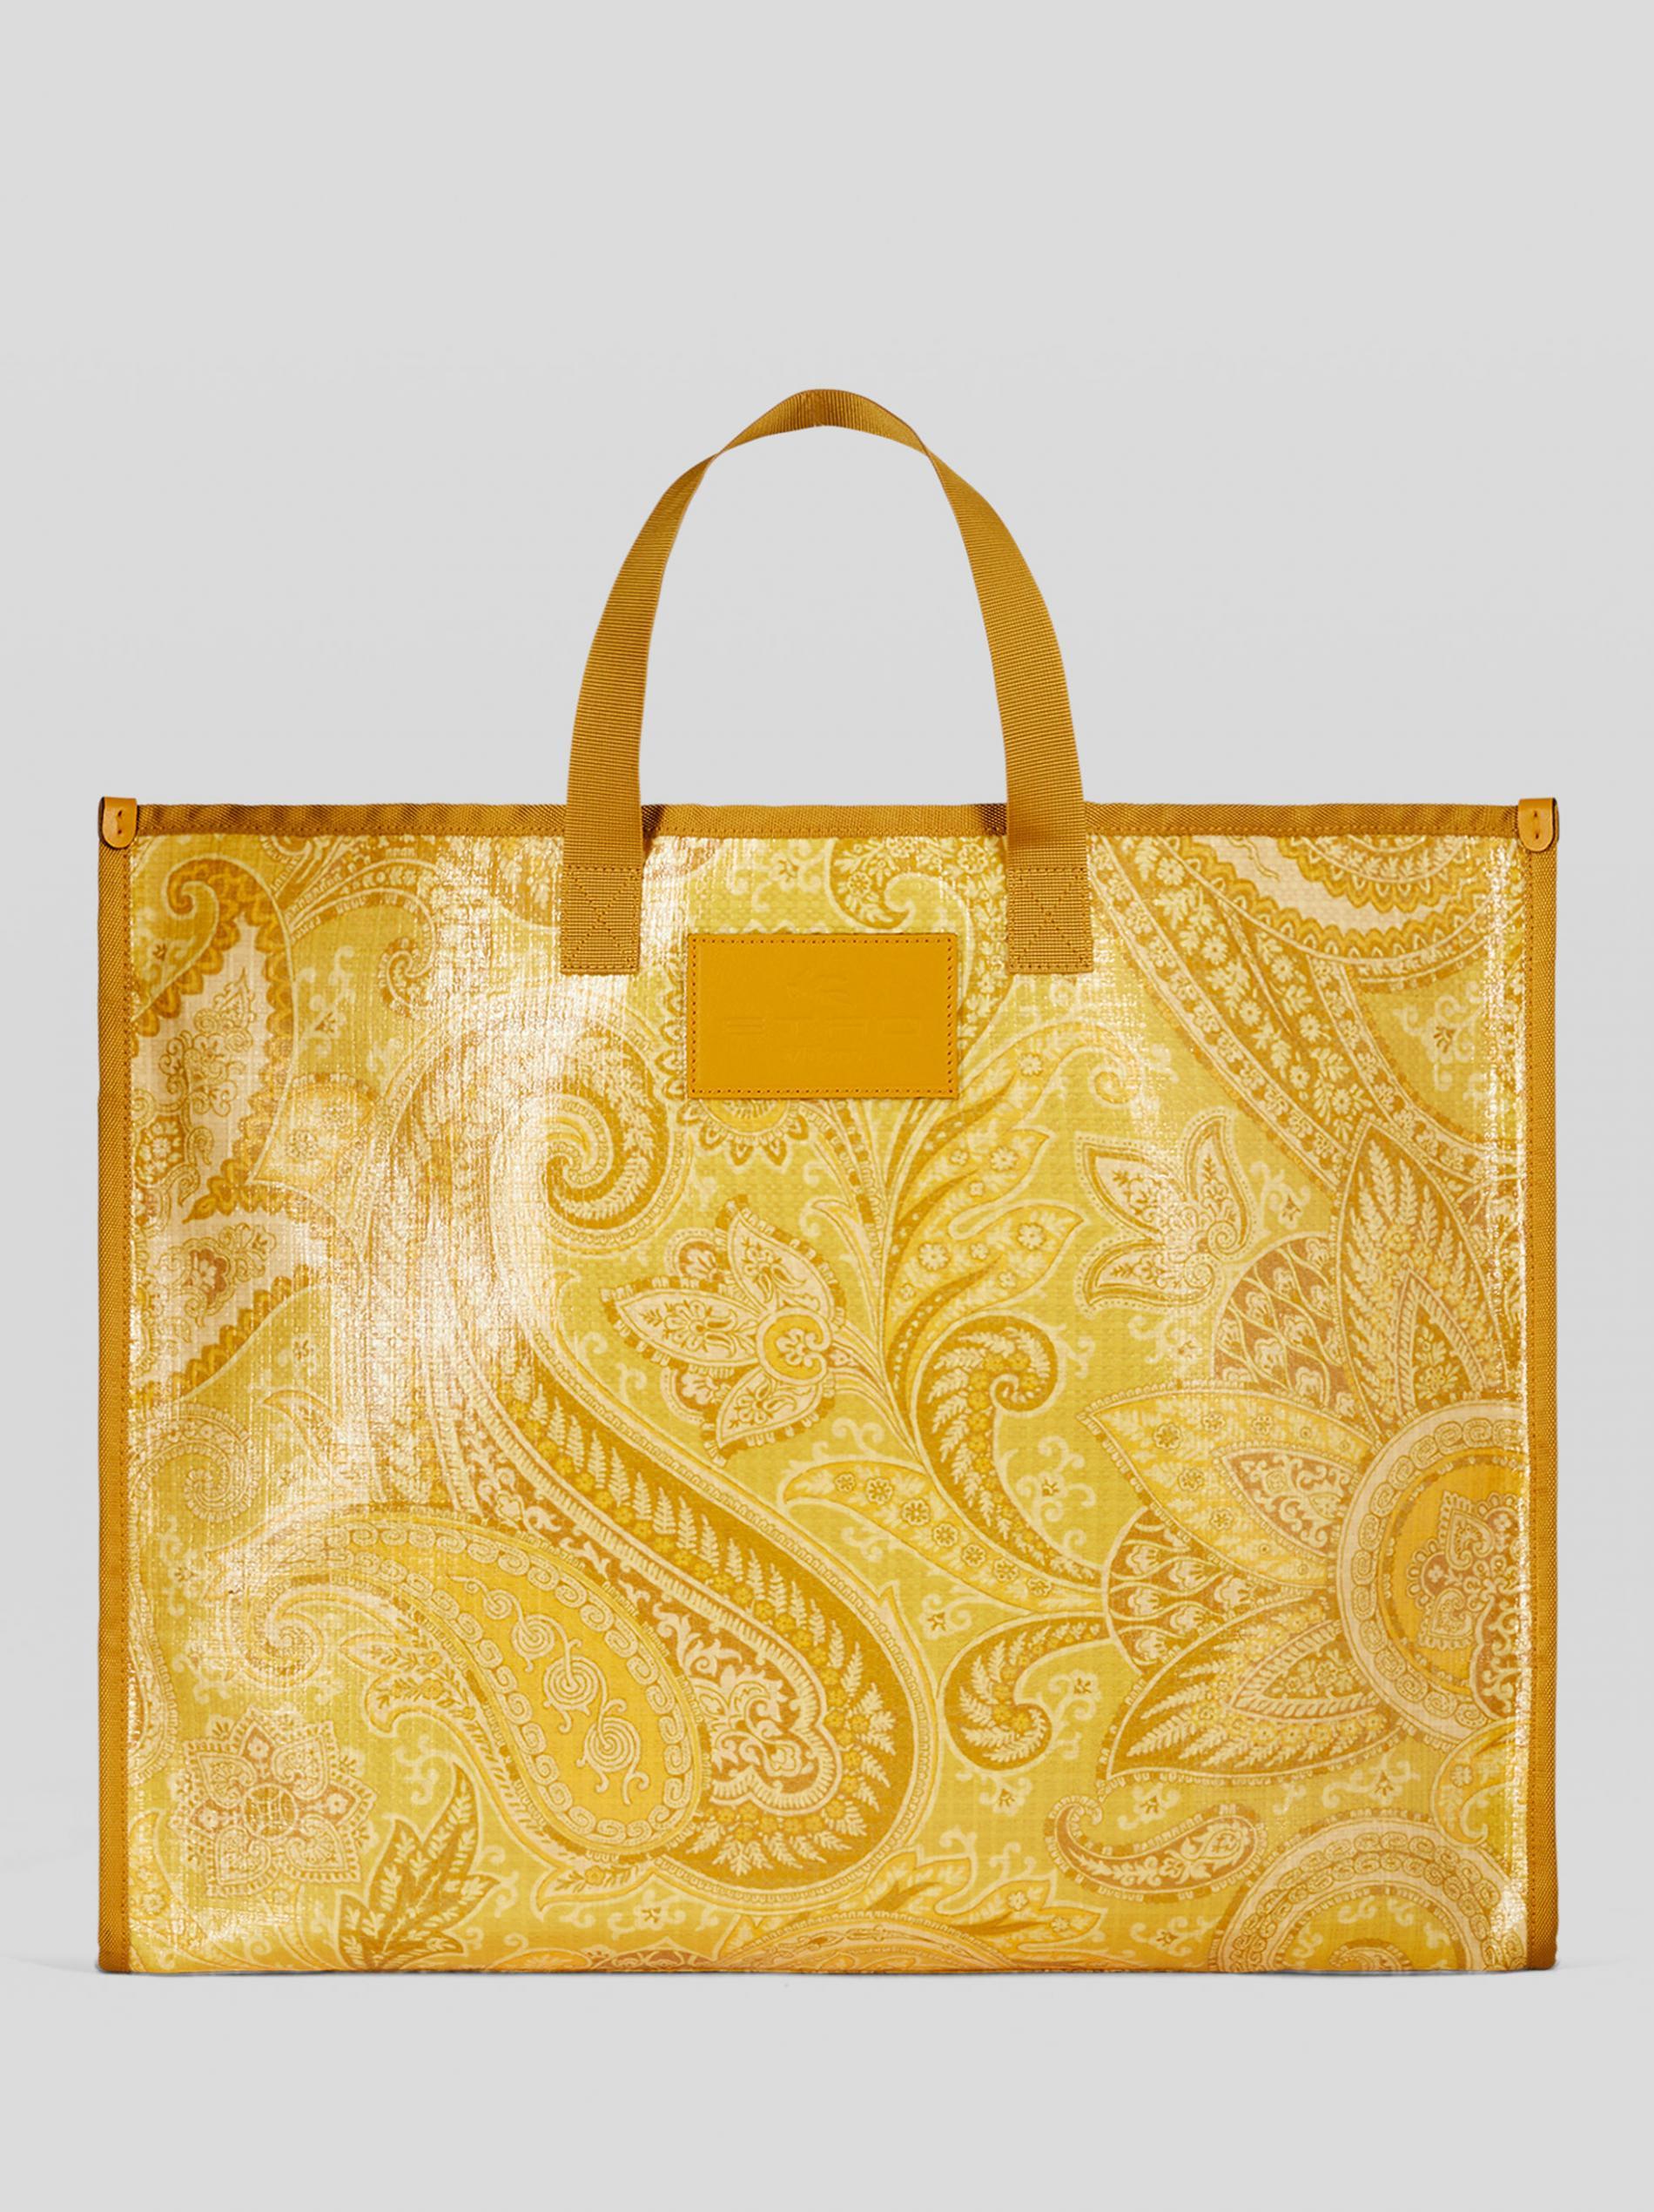 Yellow paisley-print logo nylon tote bag from ETRO featuring logo patch to the front, two top handles, main compartment, internal logo patch and internal zip-fastening pocket. Perfect for every day or a day on the beach!
- 42.5 x 35 x 17 cm
- Made